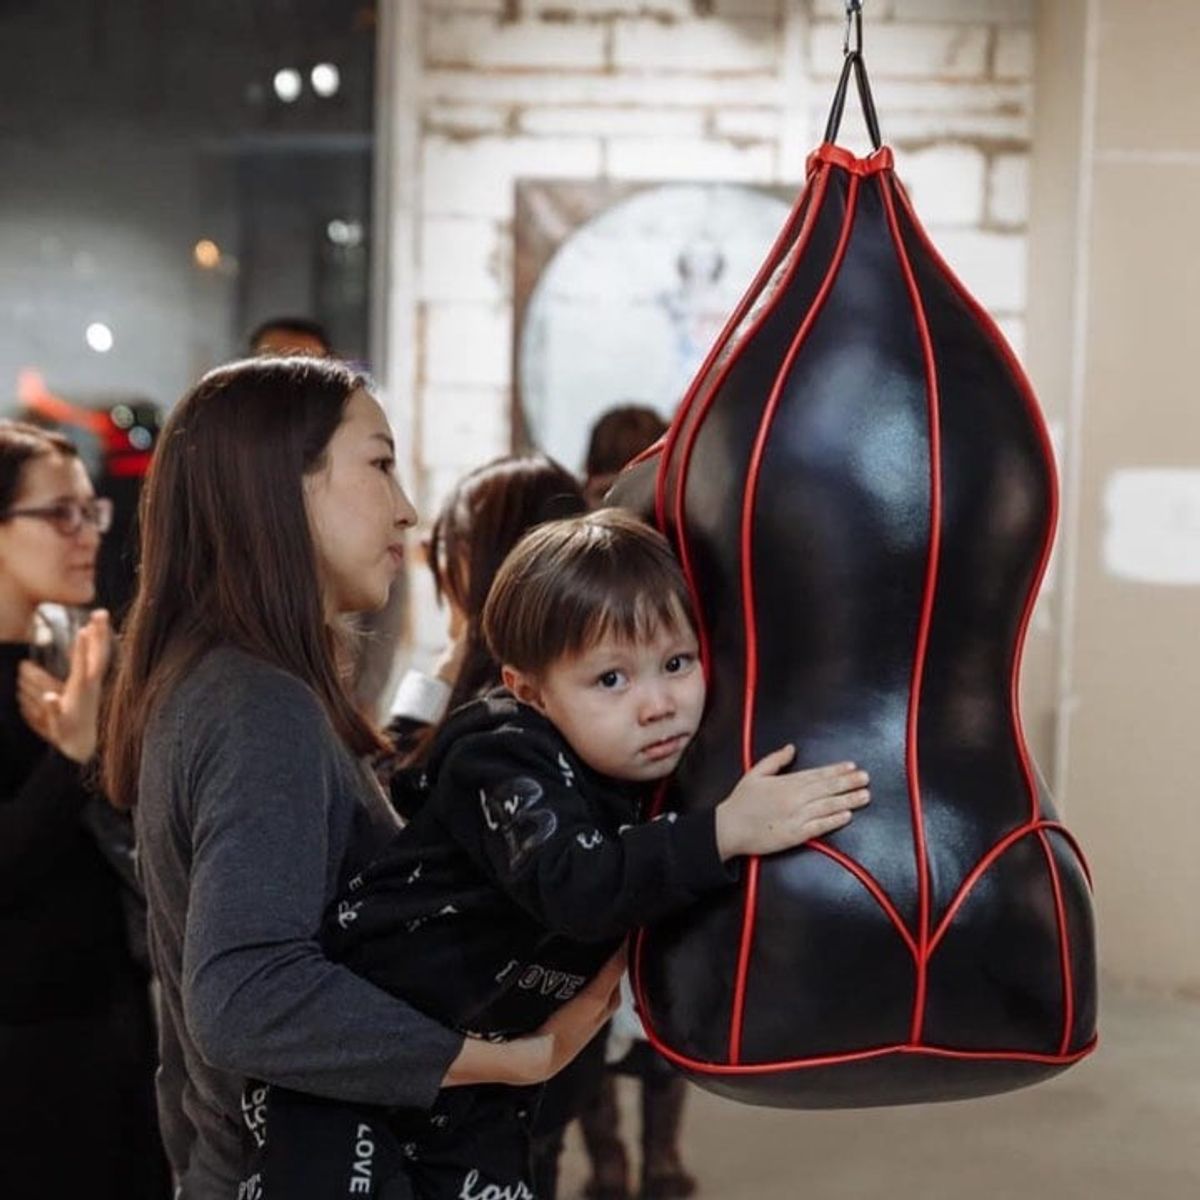 A punching bag in the shape of a female torso by Zoya Falkova is one of the works that has been pulled from the Feminnale Courtesy of the artist